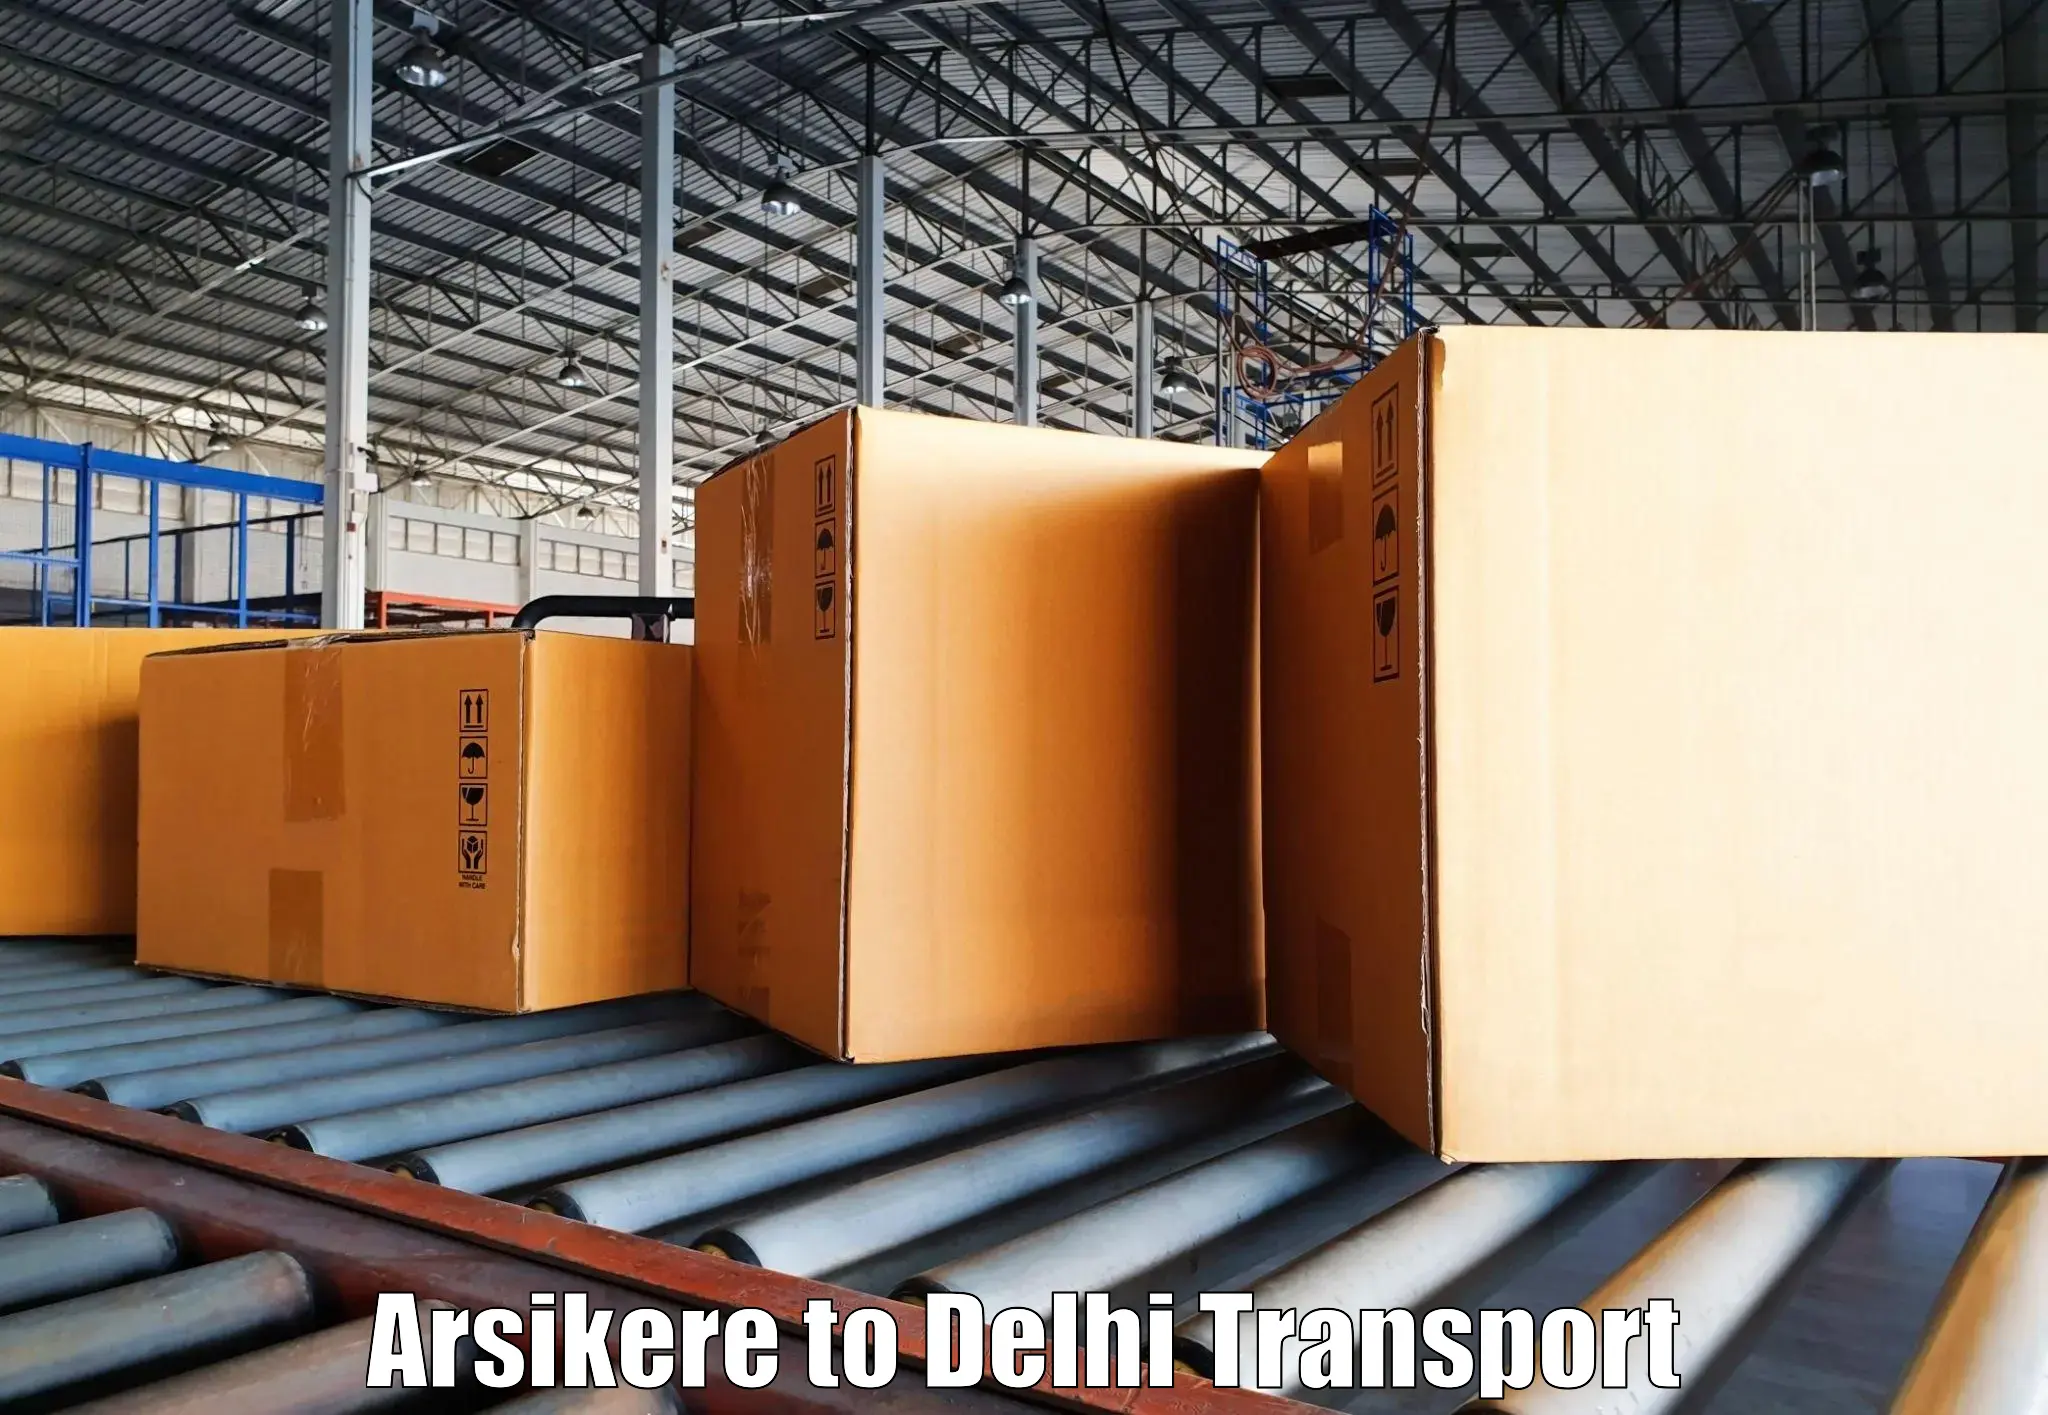 Road transport online services Arsikere to NCR